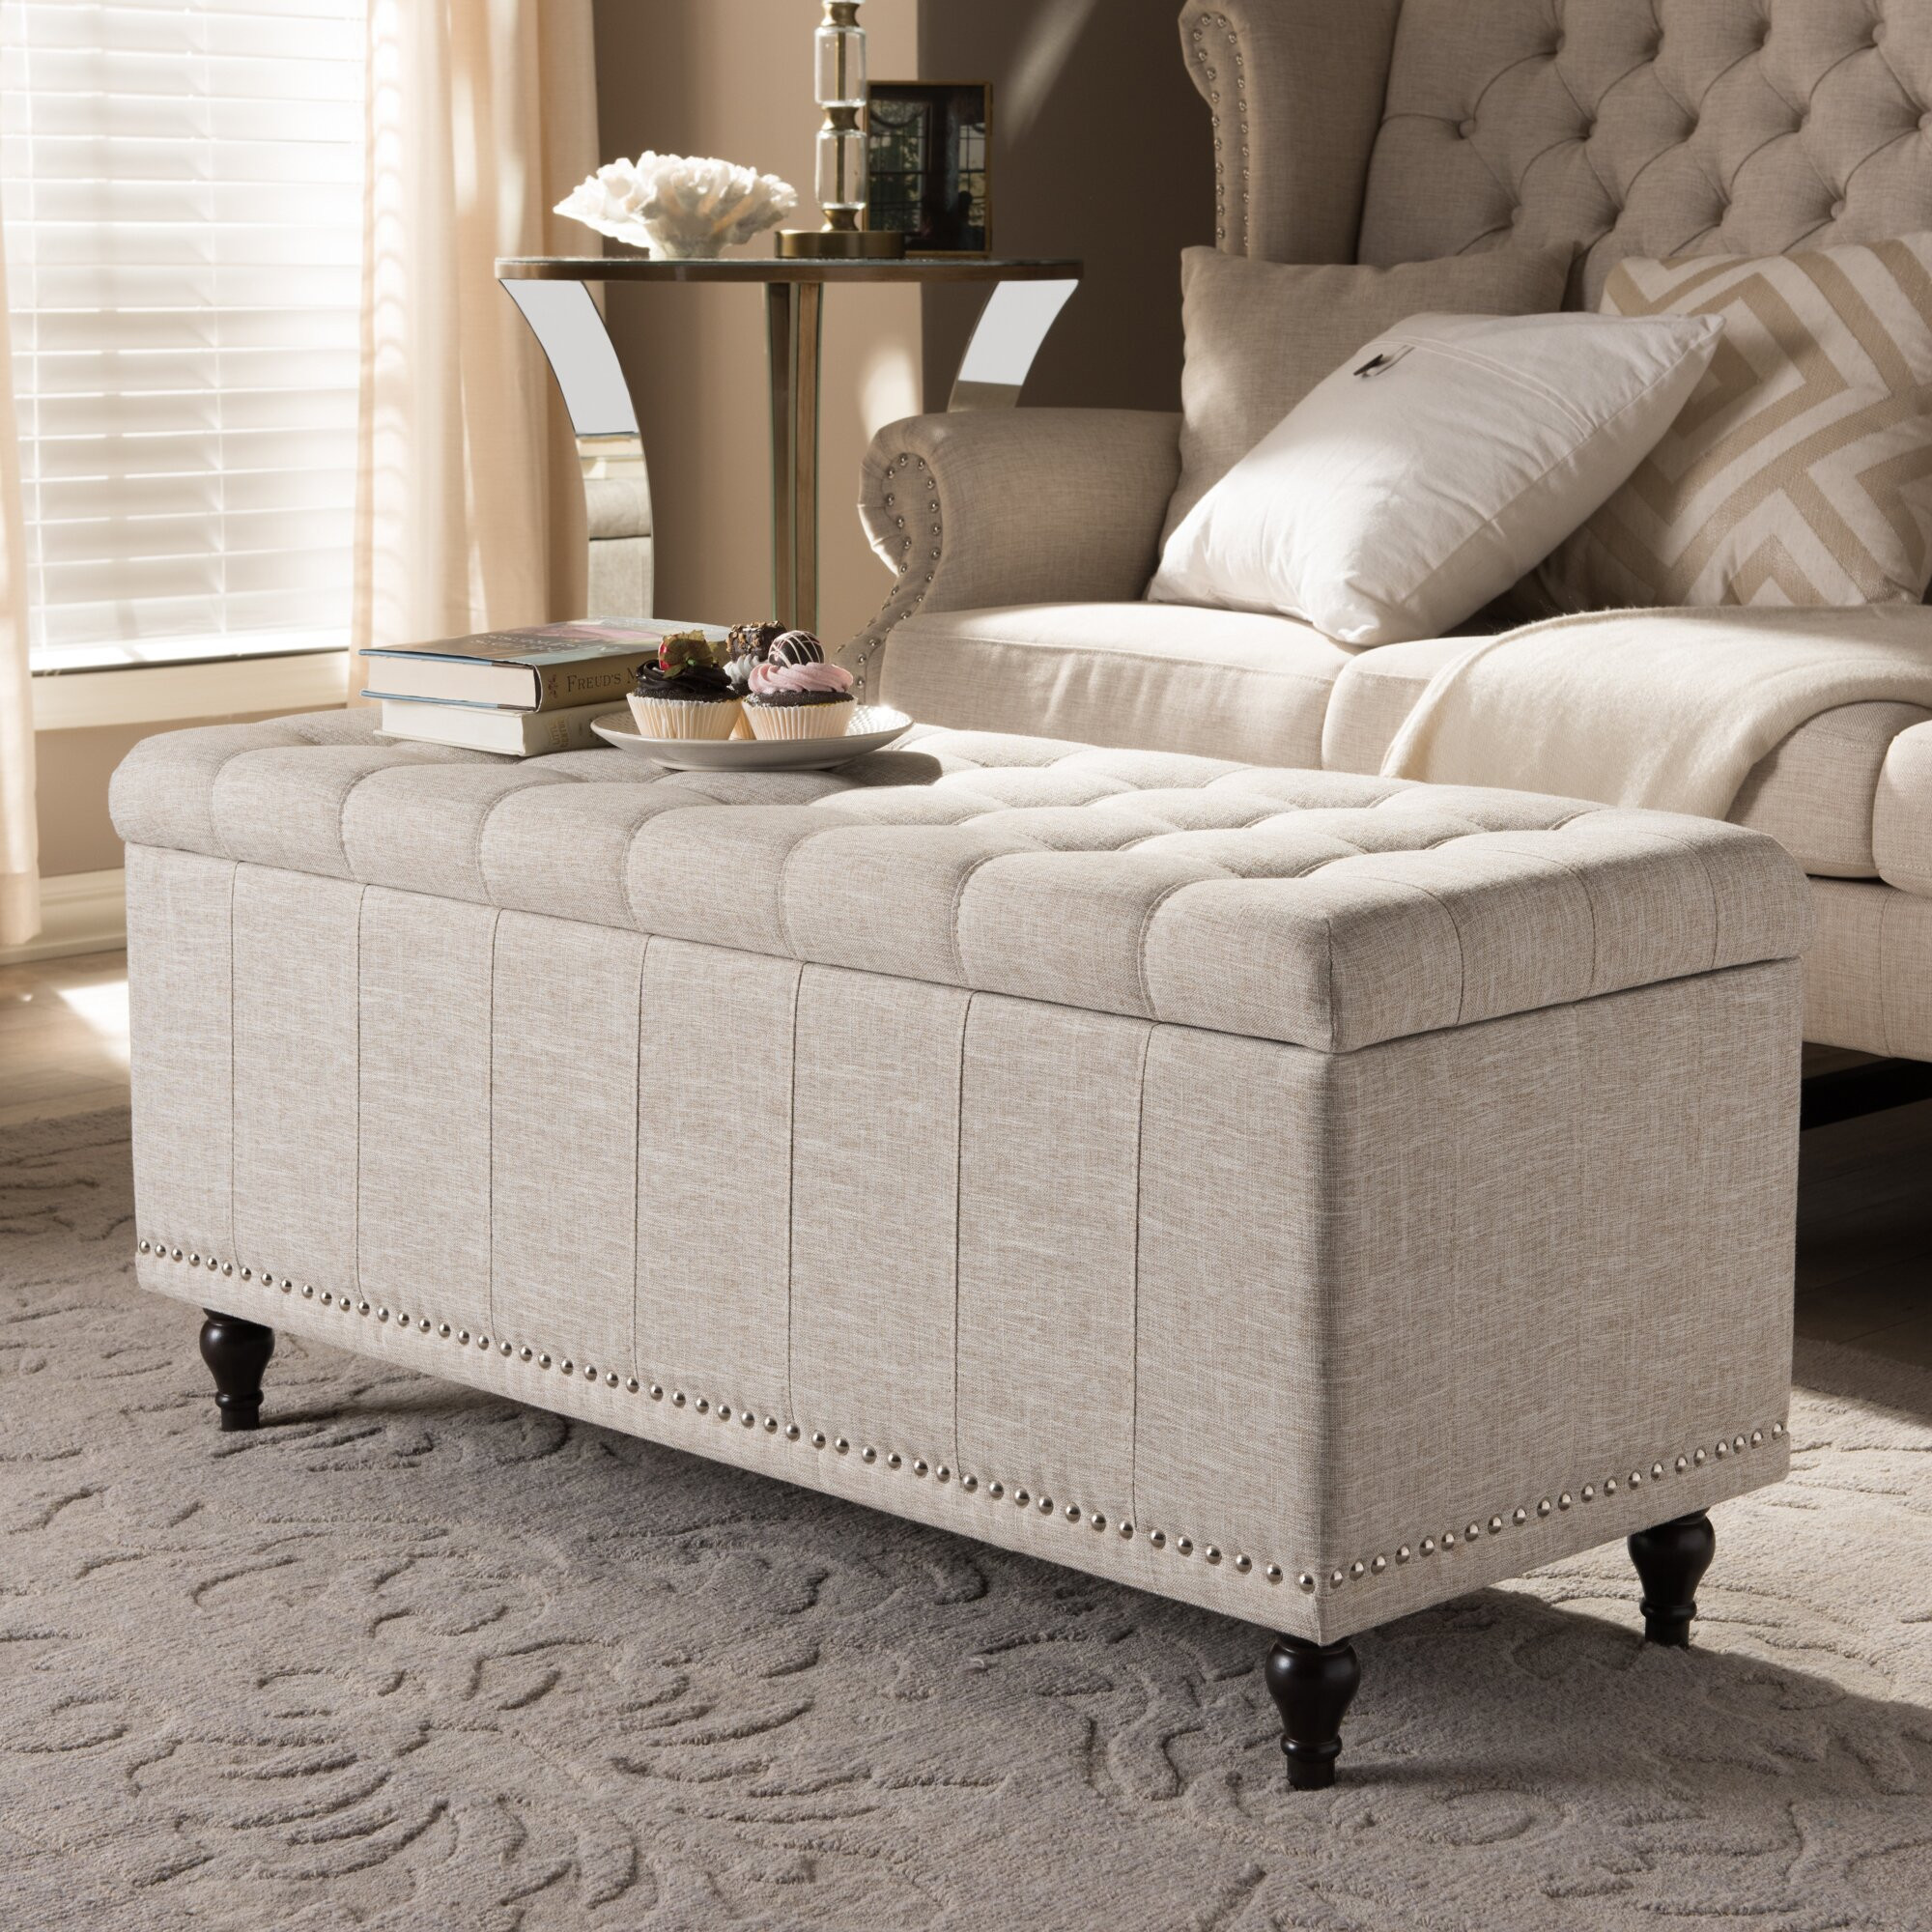 Maintaining The Elegance Of Your Bedroom Upholstered Bench